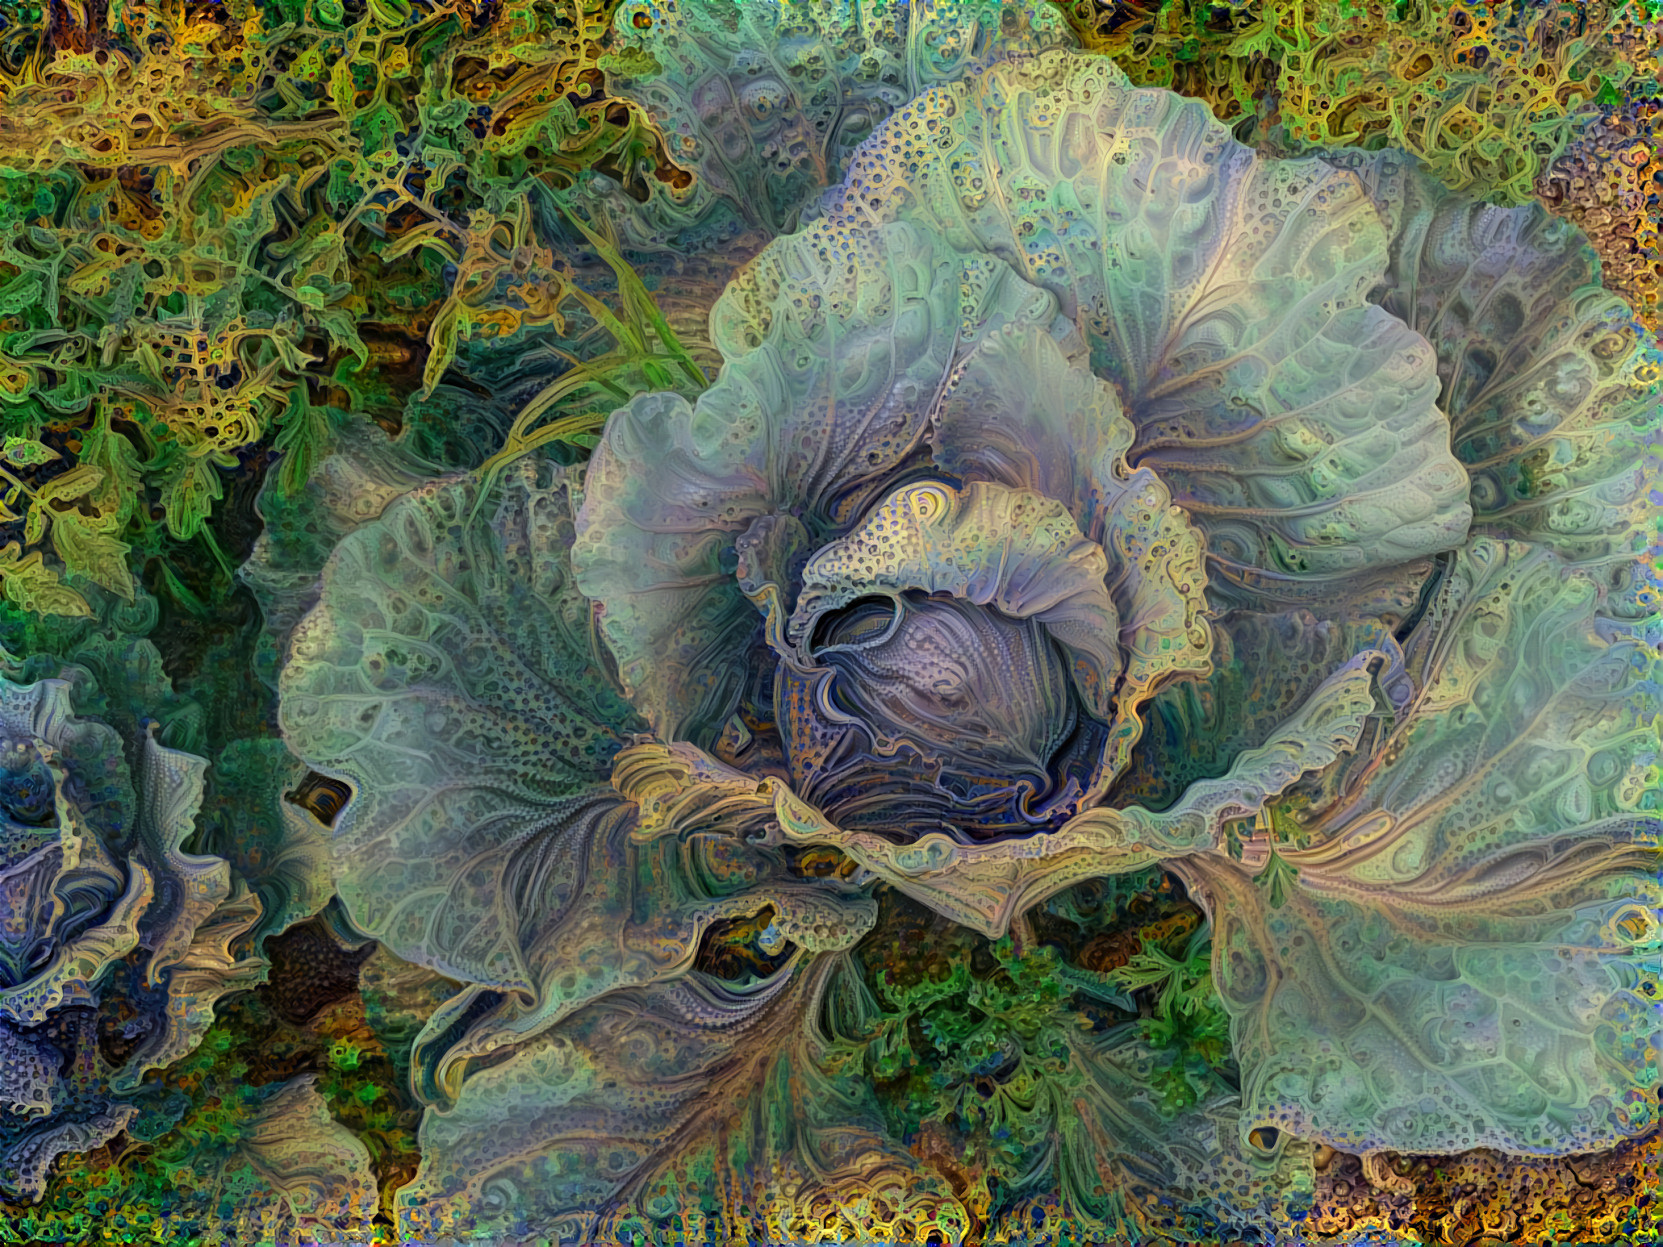 Lacy Cabbage